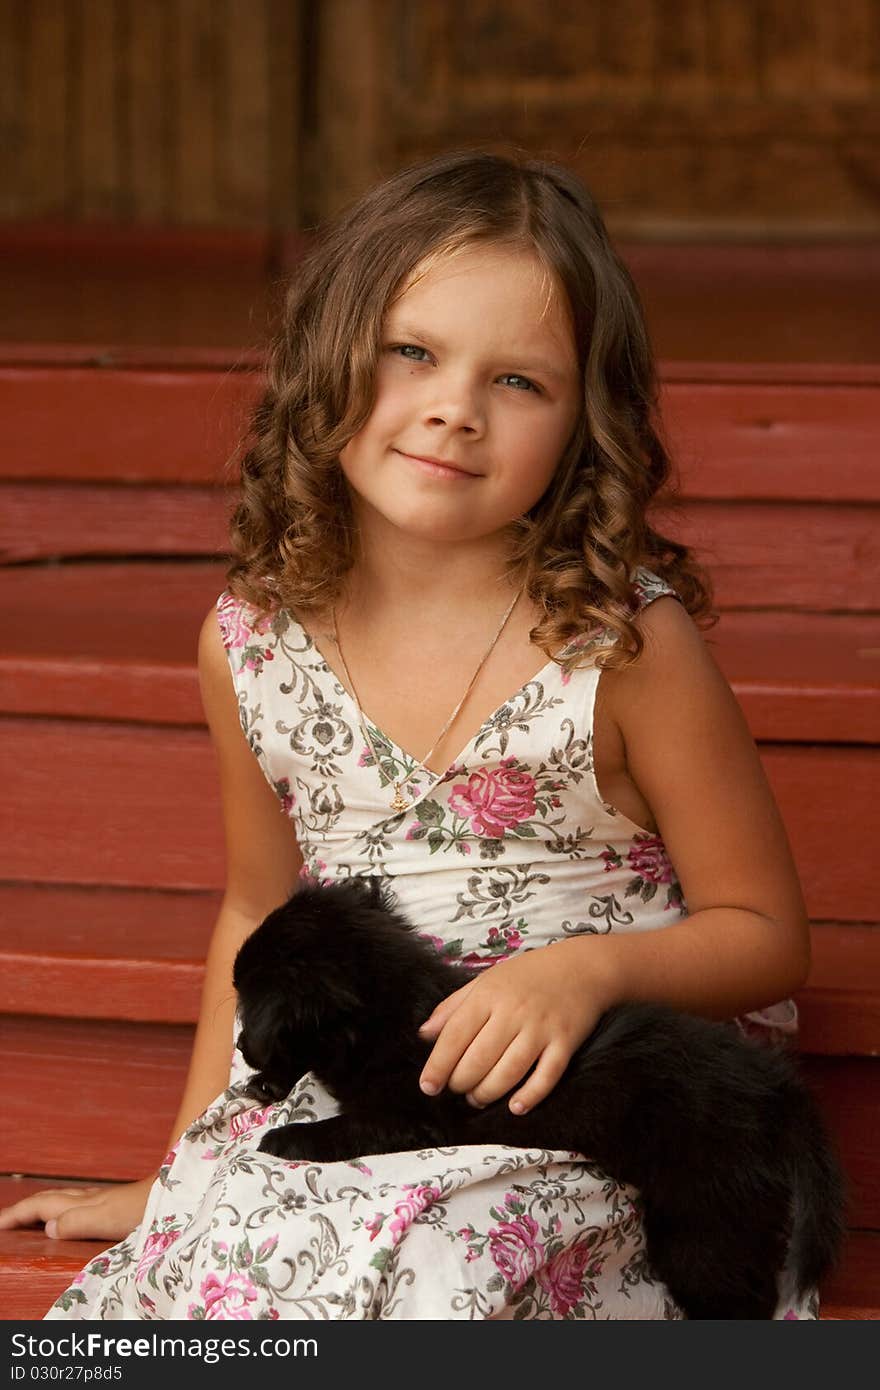 Little smiling girl holding cute black puppy. Little smiling girl holding cute black puppy.